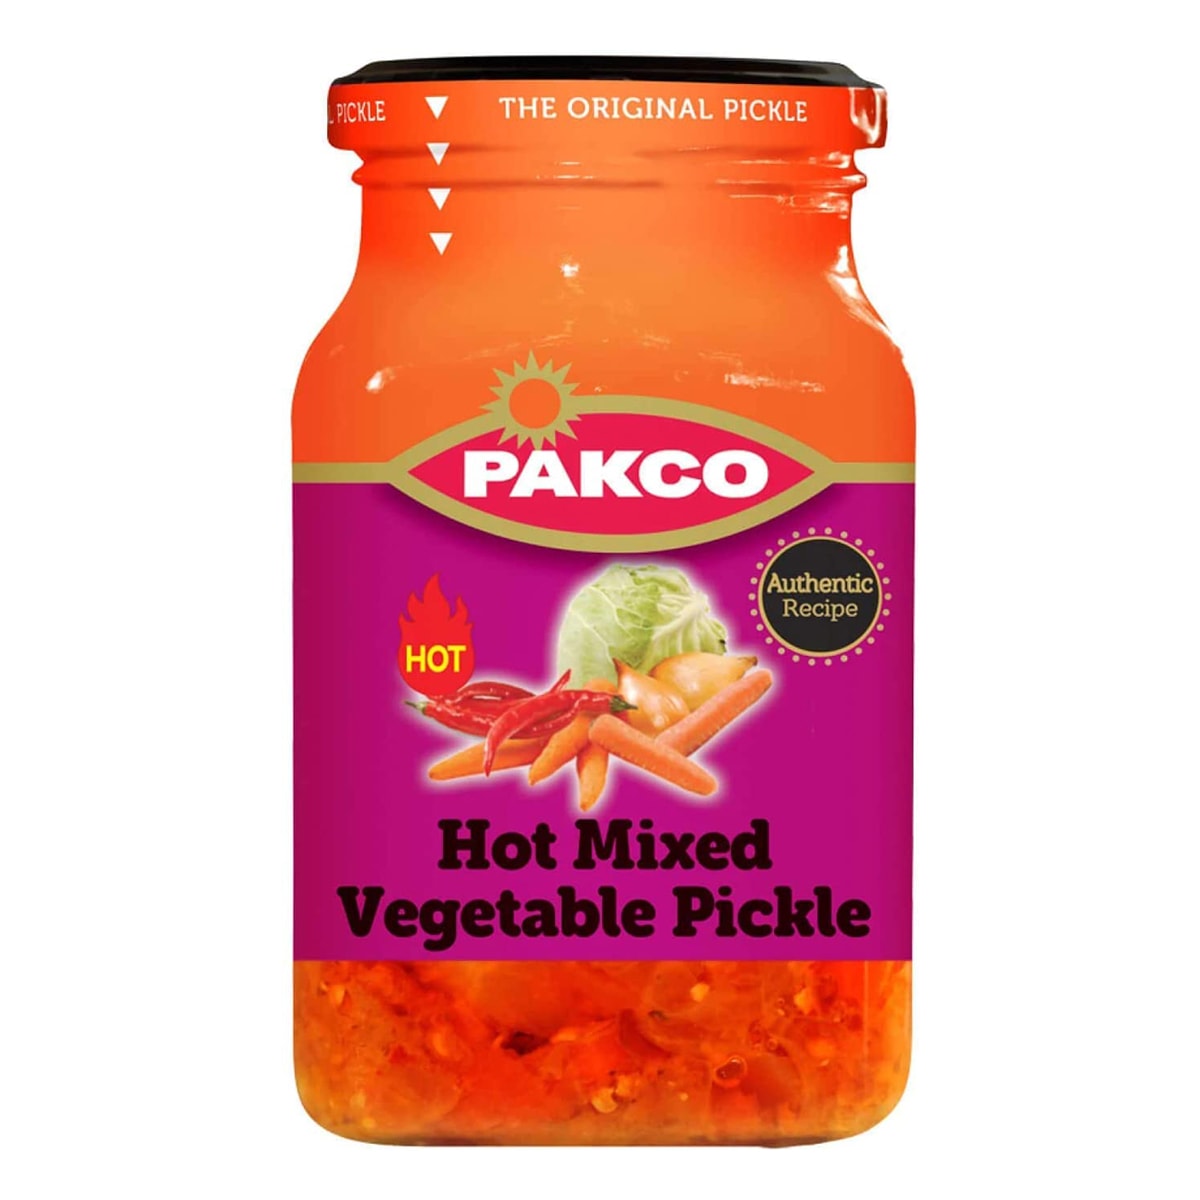 Buy Pakco Vegetable Pickle Hot Mixed - 385 gm